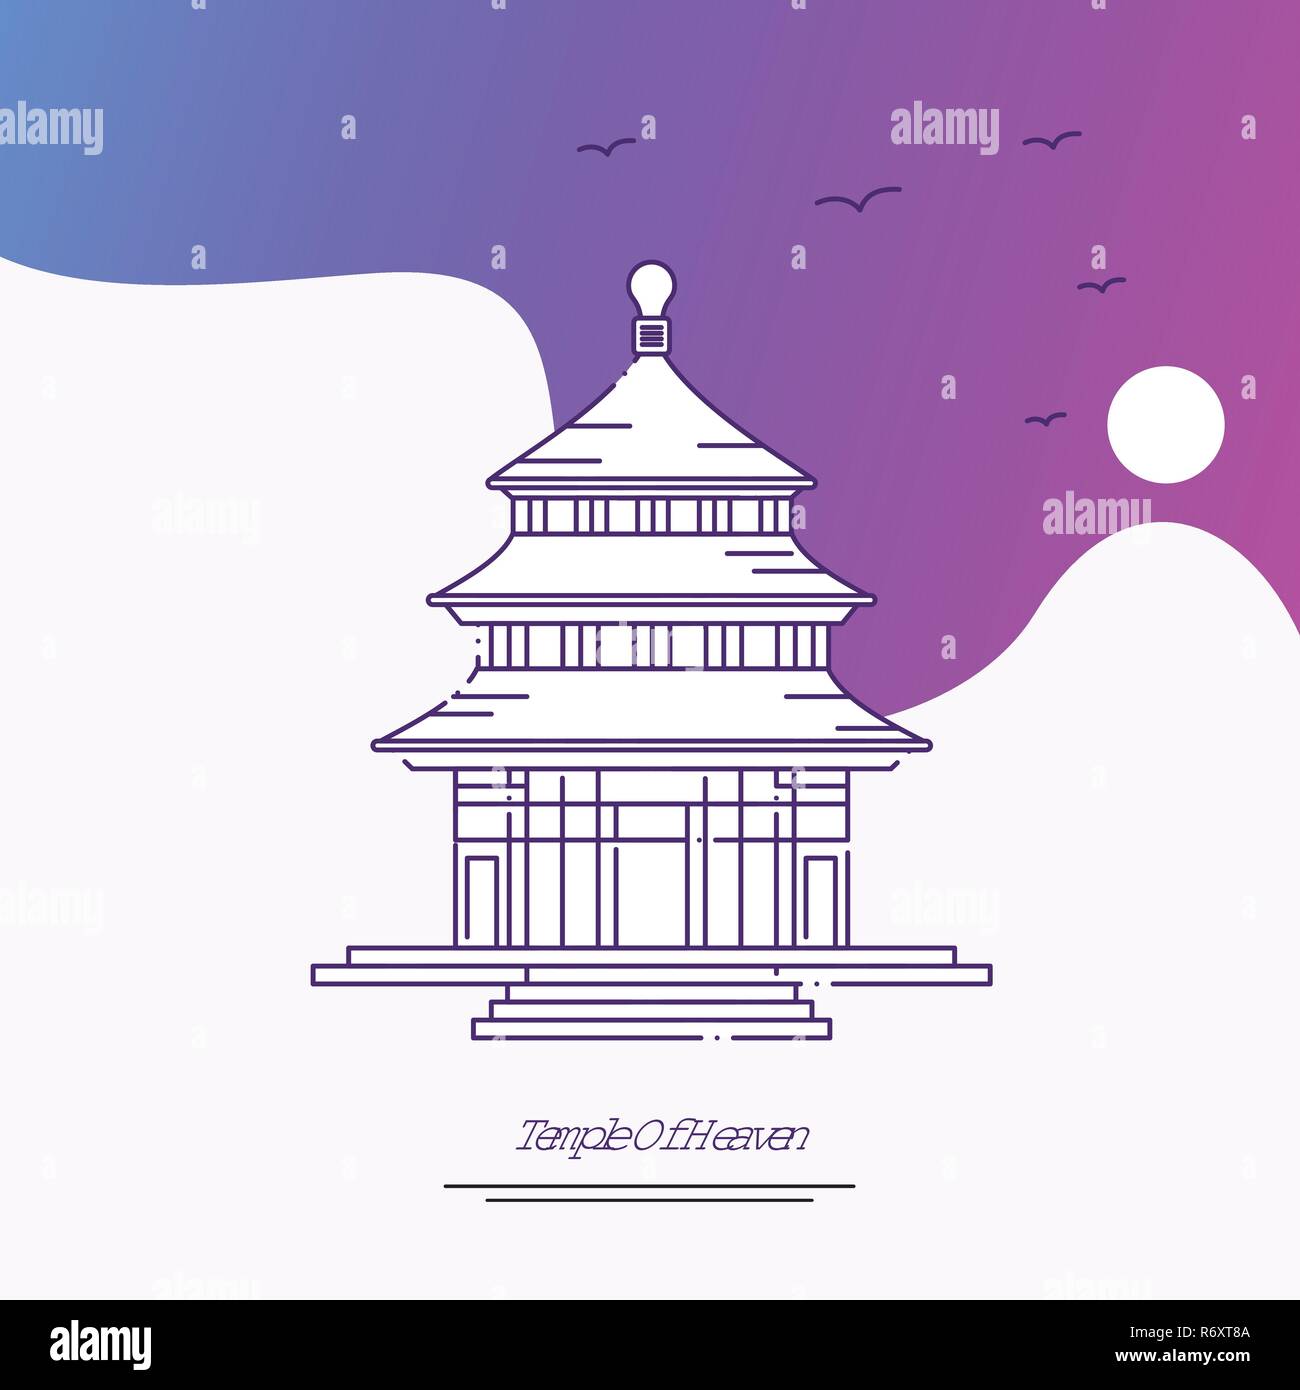 Travel TEMPLE OF HEAVEN Poster Template. Purple creative background Stock Vector